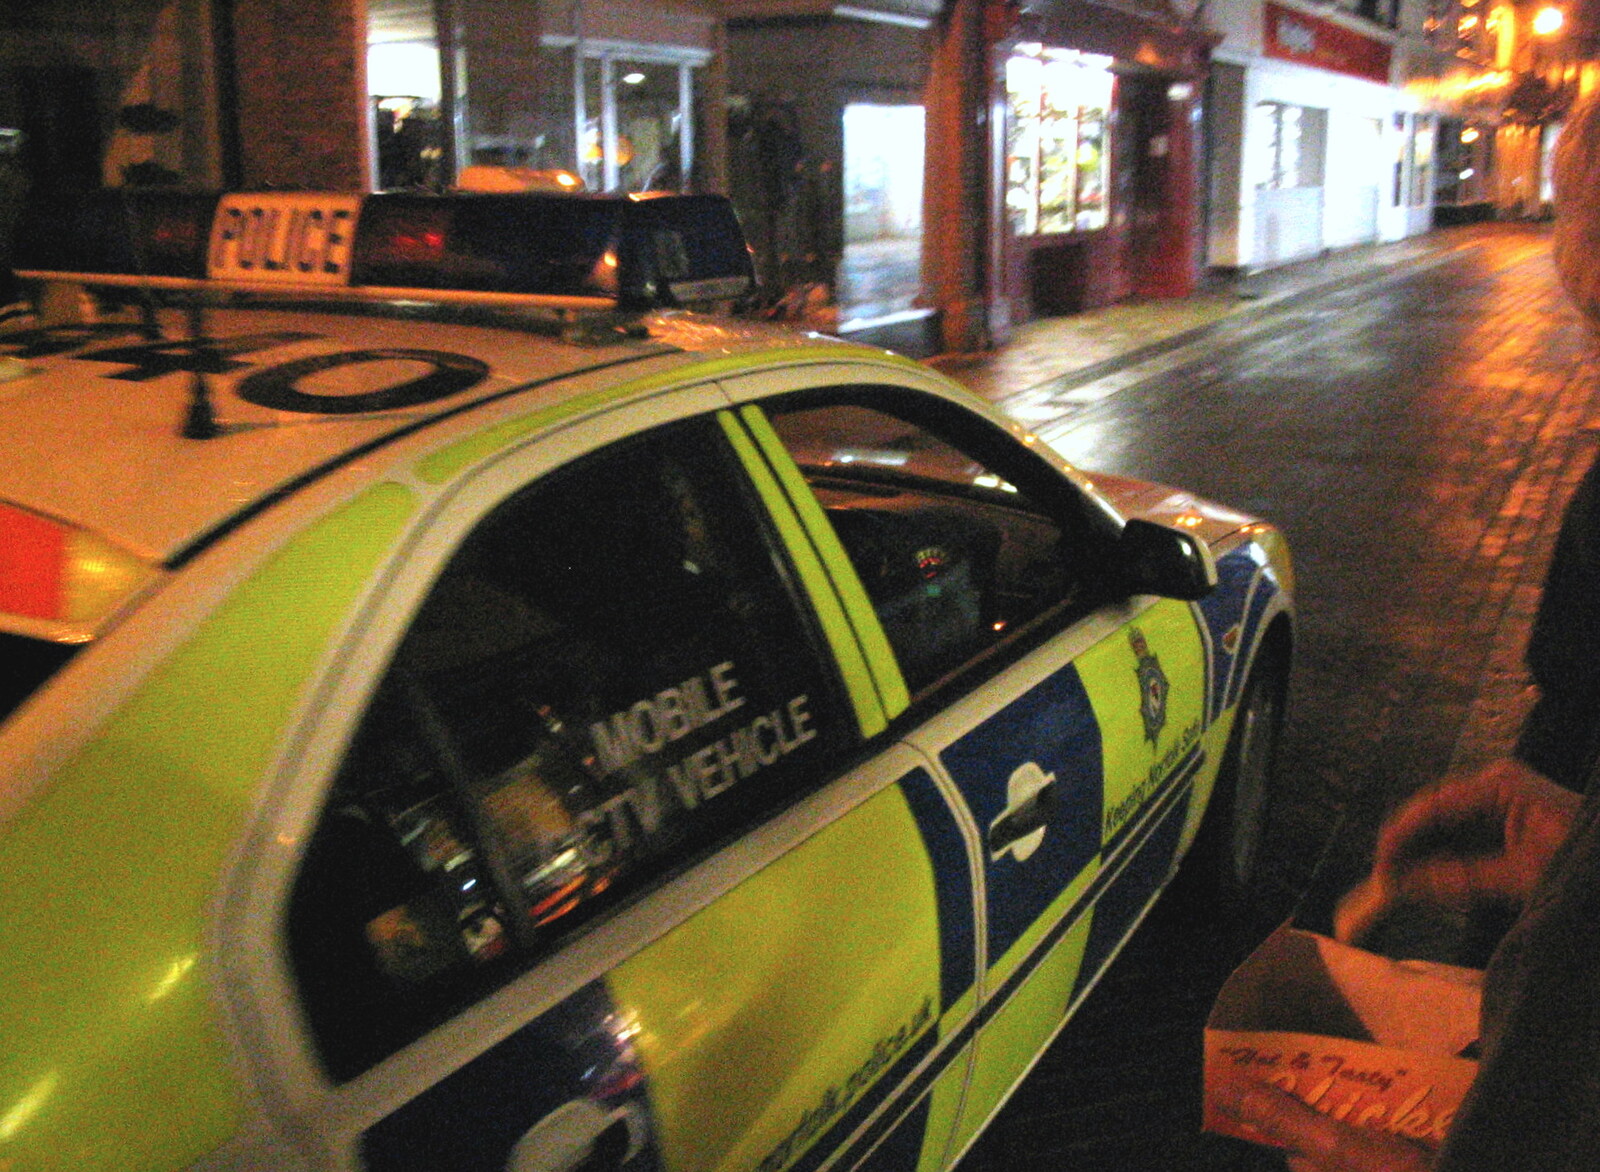 The police of Diss do a drive-by from Music at the Waterfront and Upstairs at Revolution Records, Diss - 8th May 2005